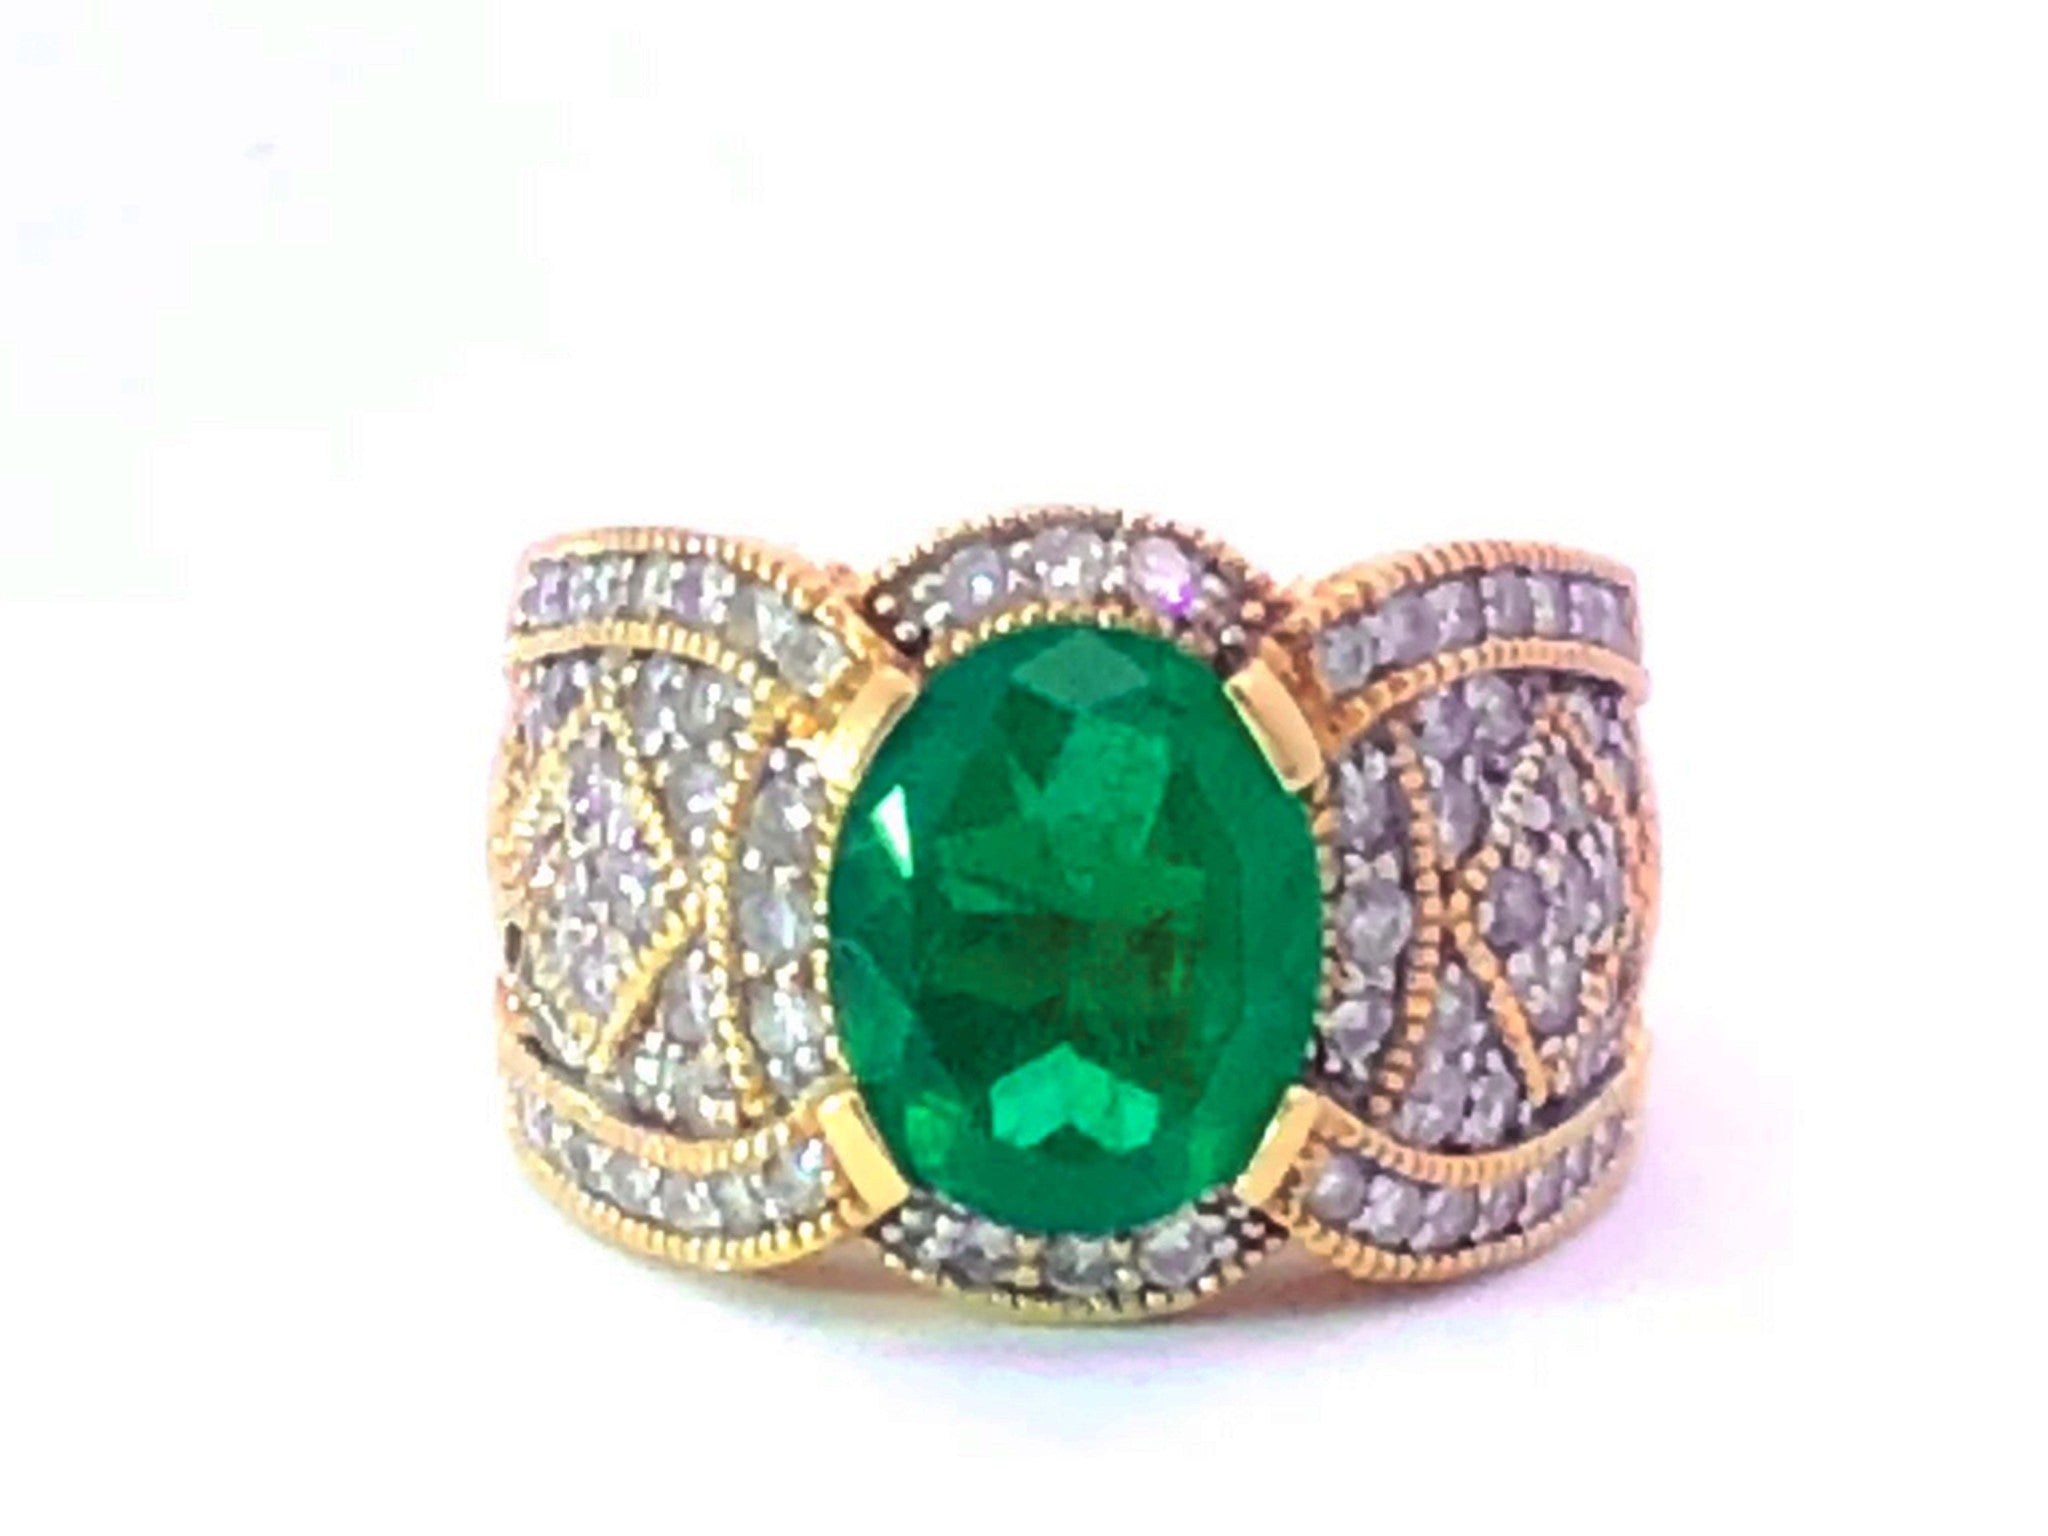 GIA Rare 2.65 ct. Colombian Emerald & Diamond Cigar Band Ring in 14k Yellow Gold